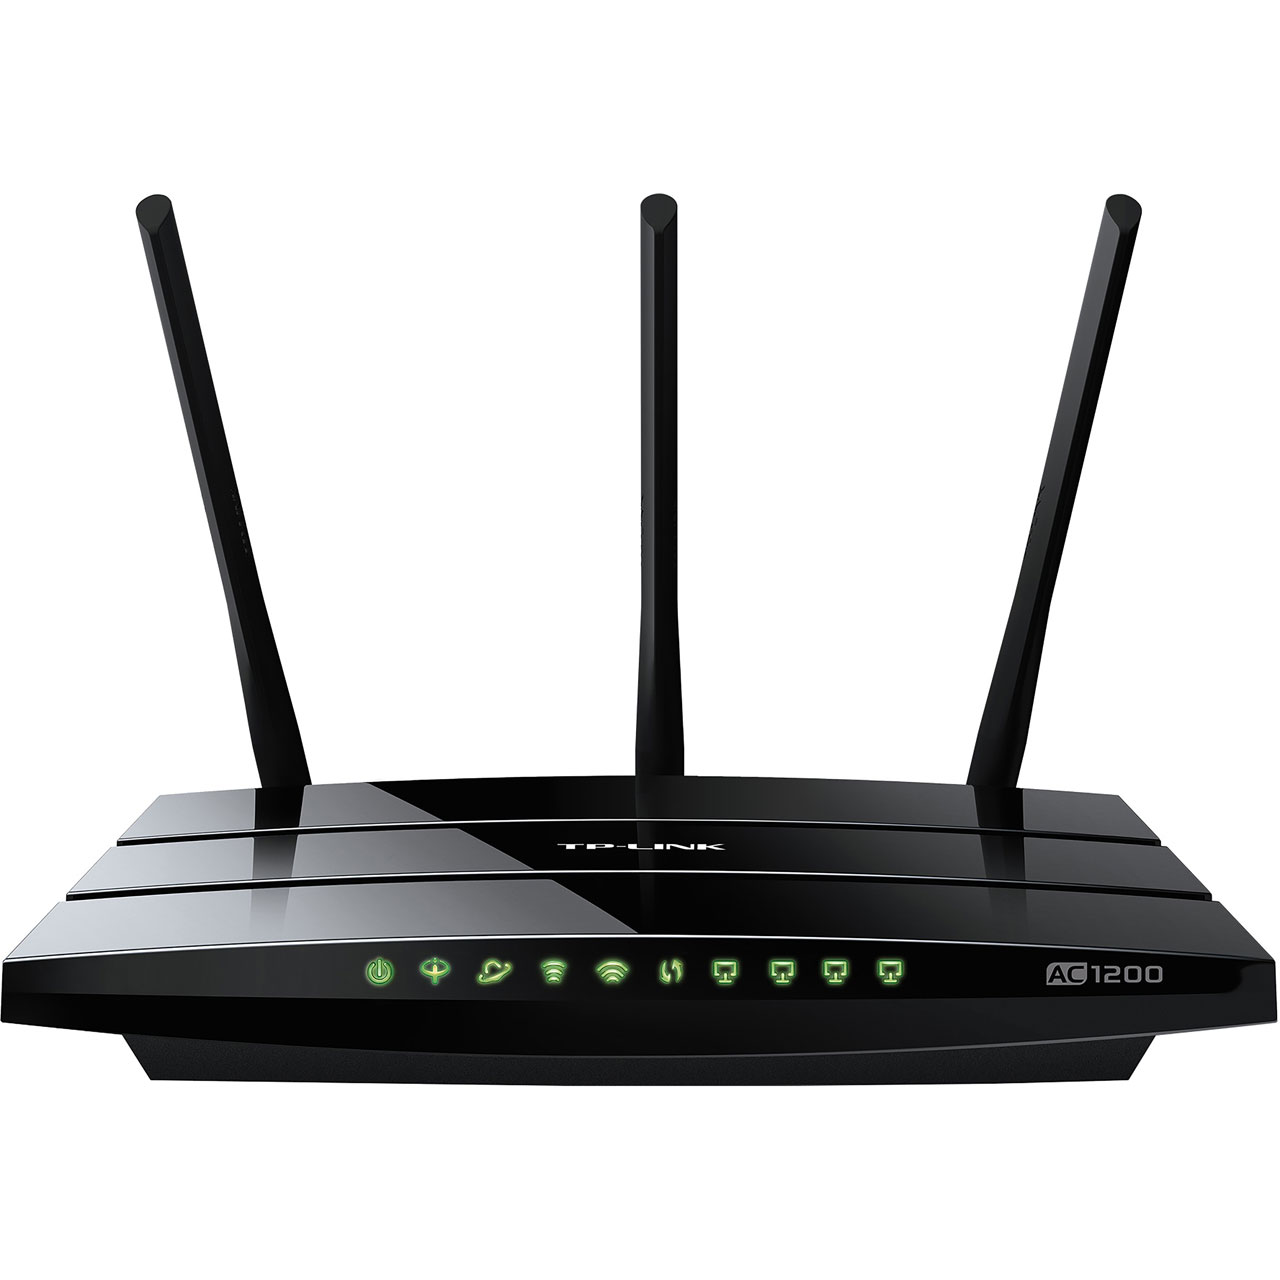 TP-Link Archer VR400 Dual Band AC1200 Gaming Wireless Router Review